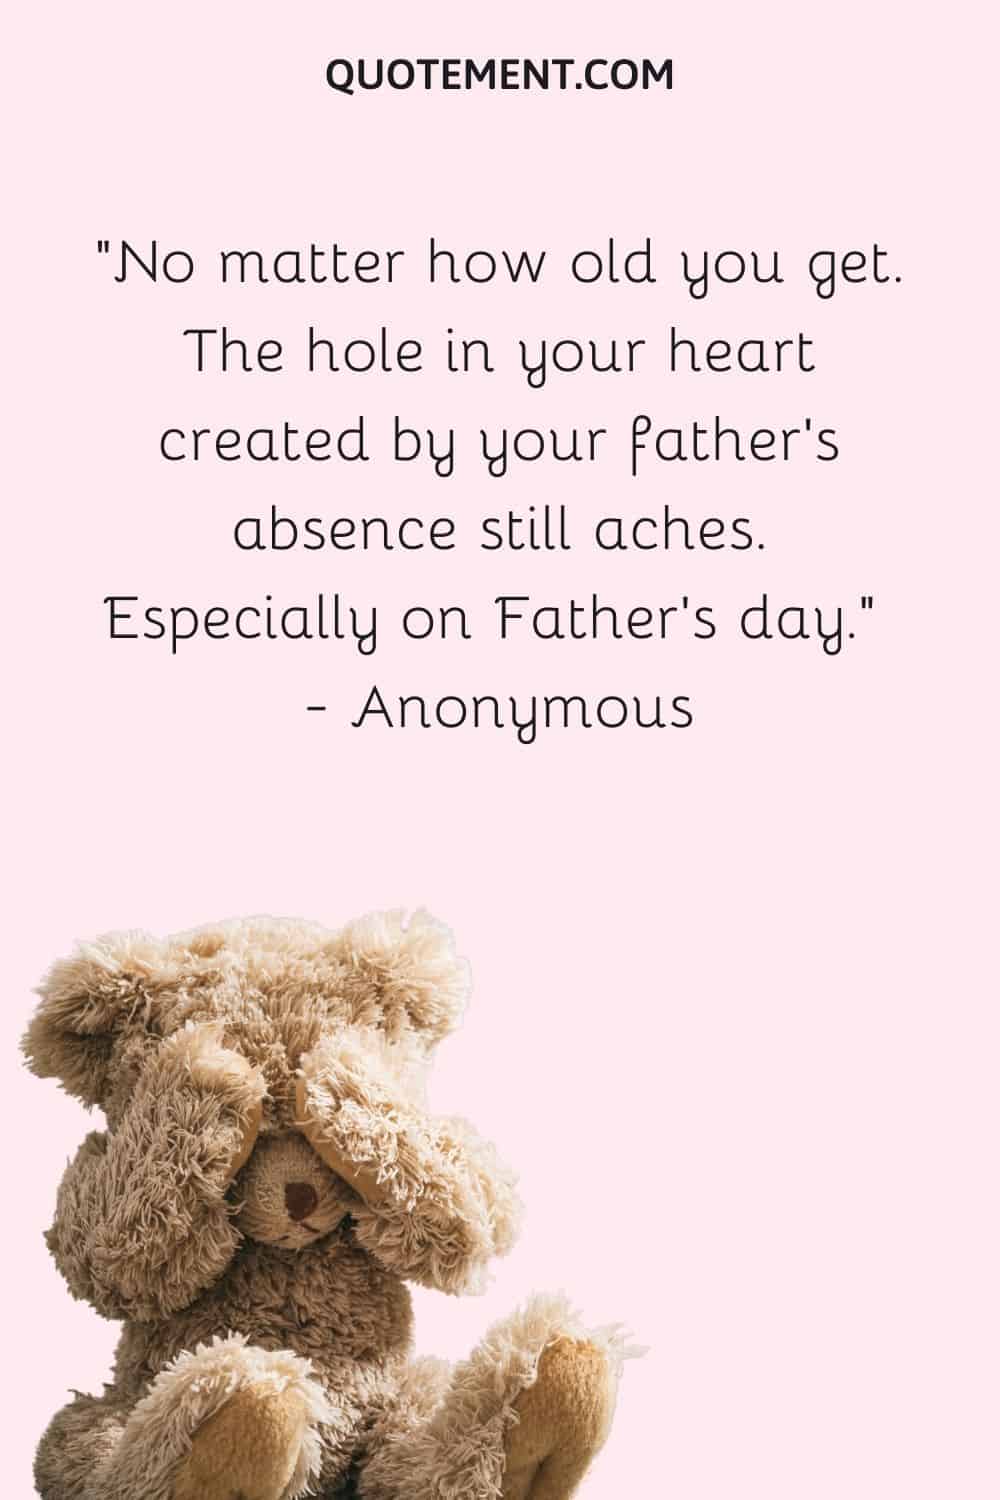 No matter how old you get. The hole in your heart created by your father's absence still aches. Especially on Father's day. — Anonymous